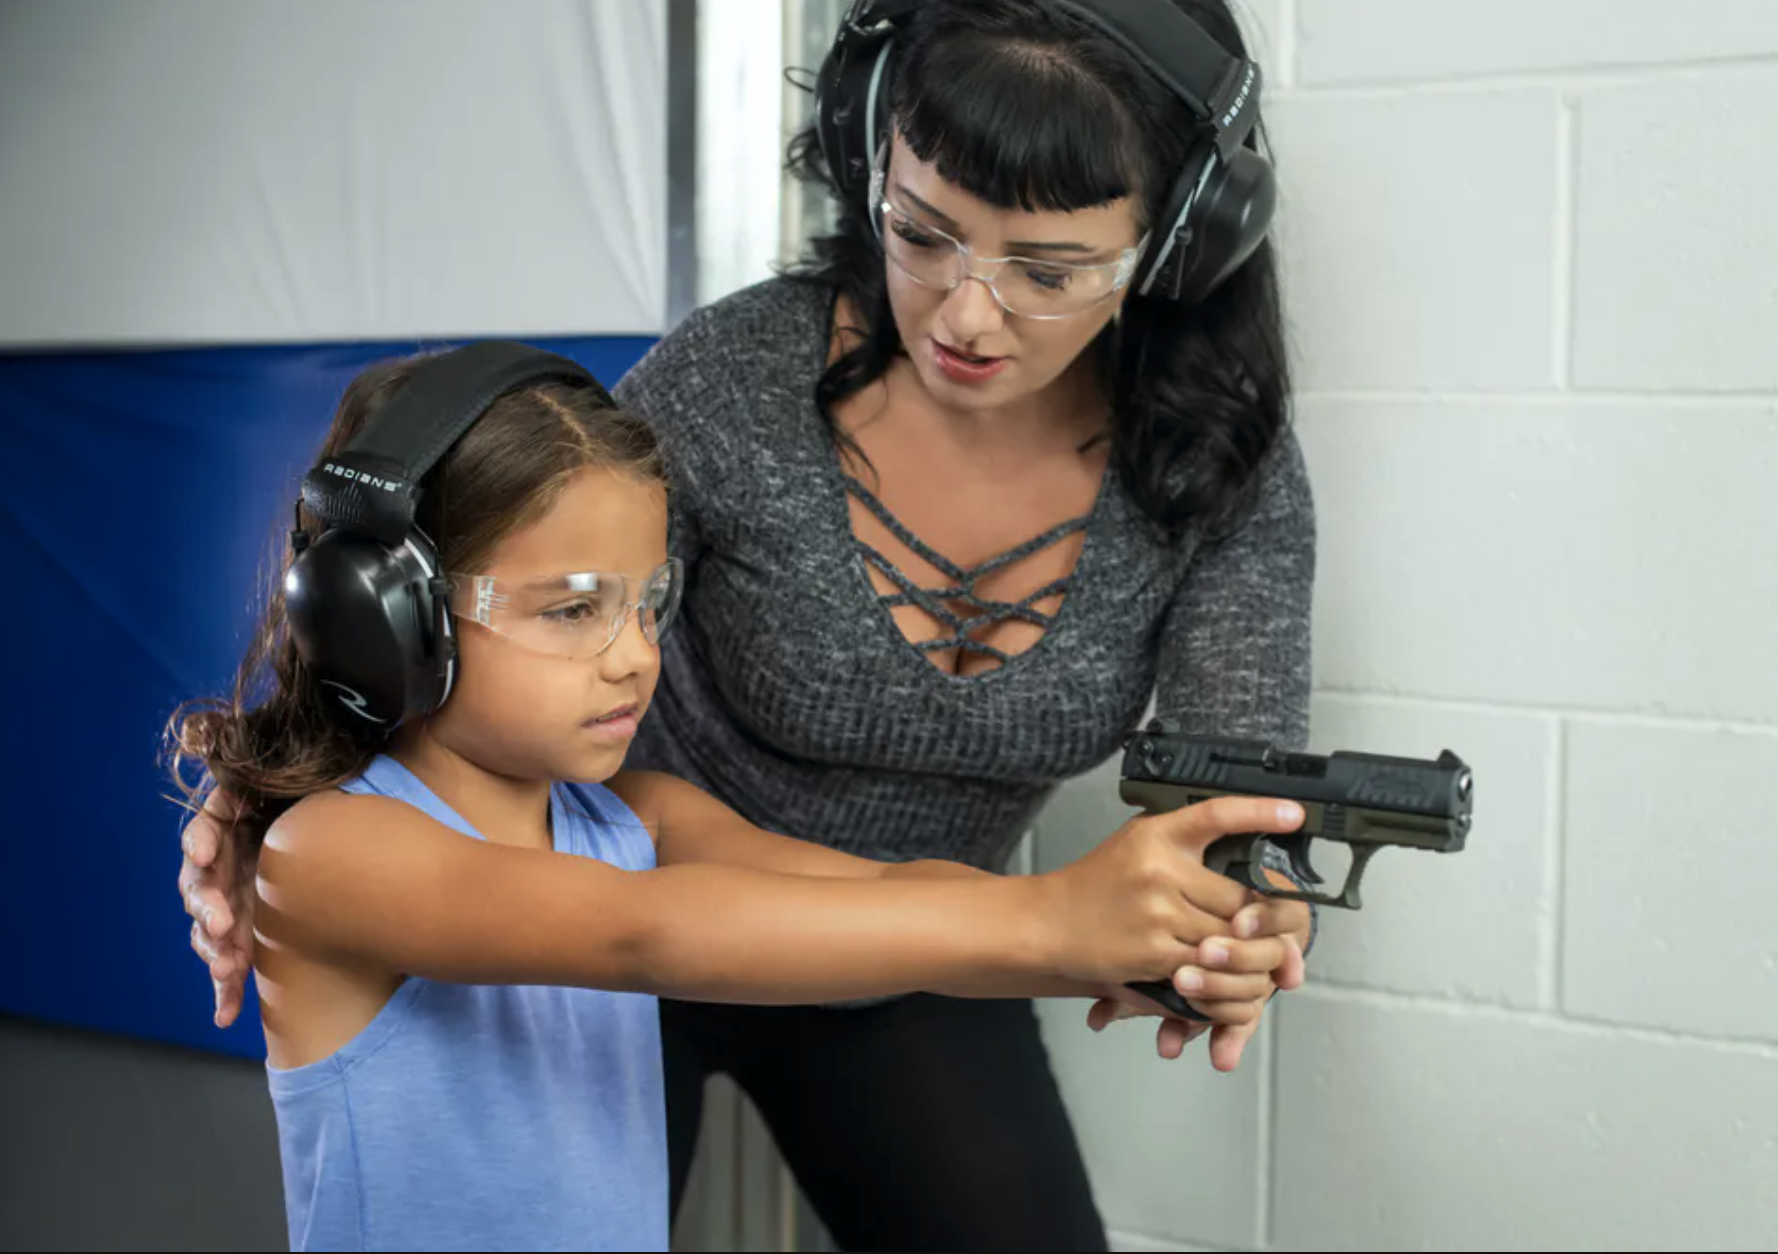 small size child with walther pistol and gun range